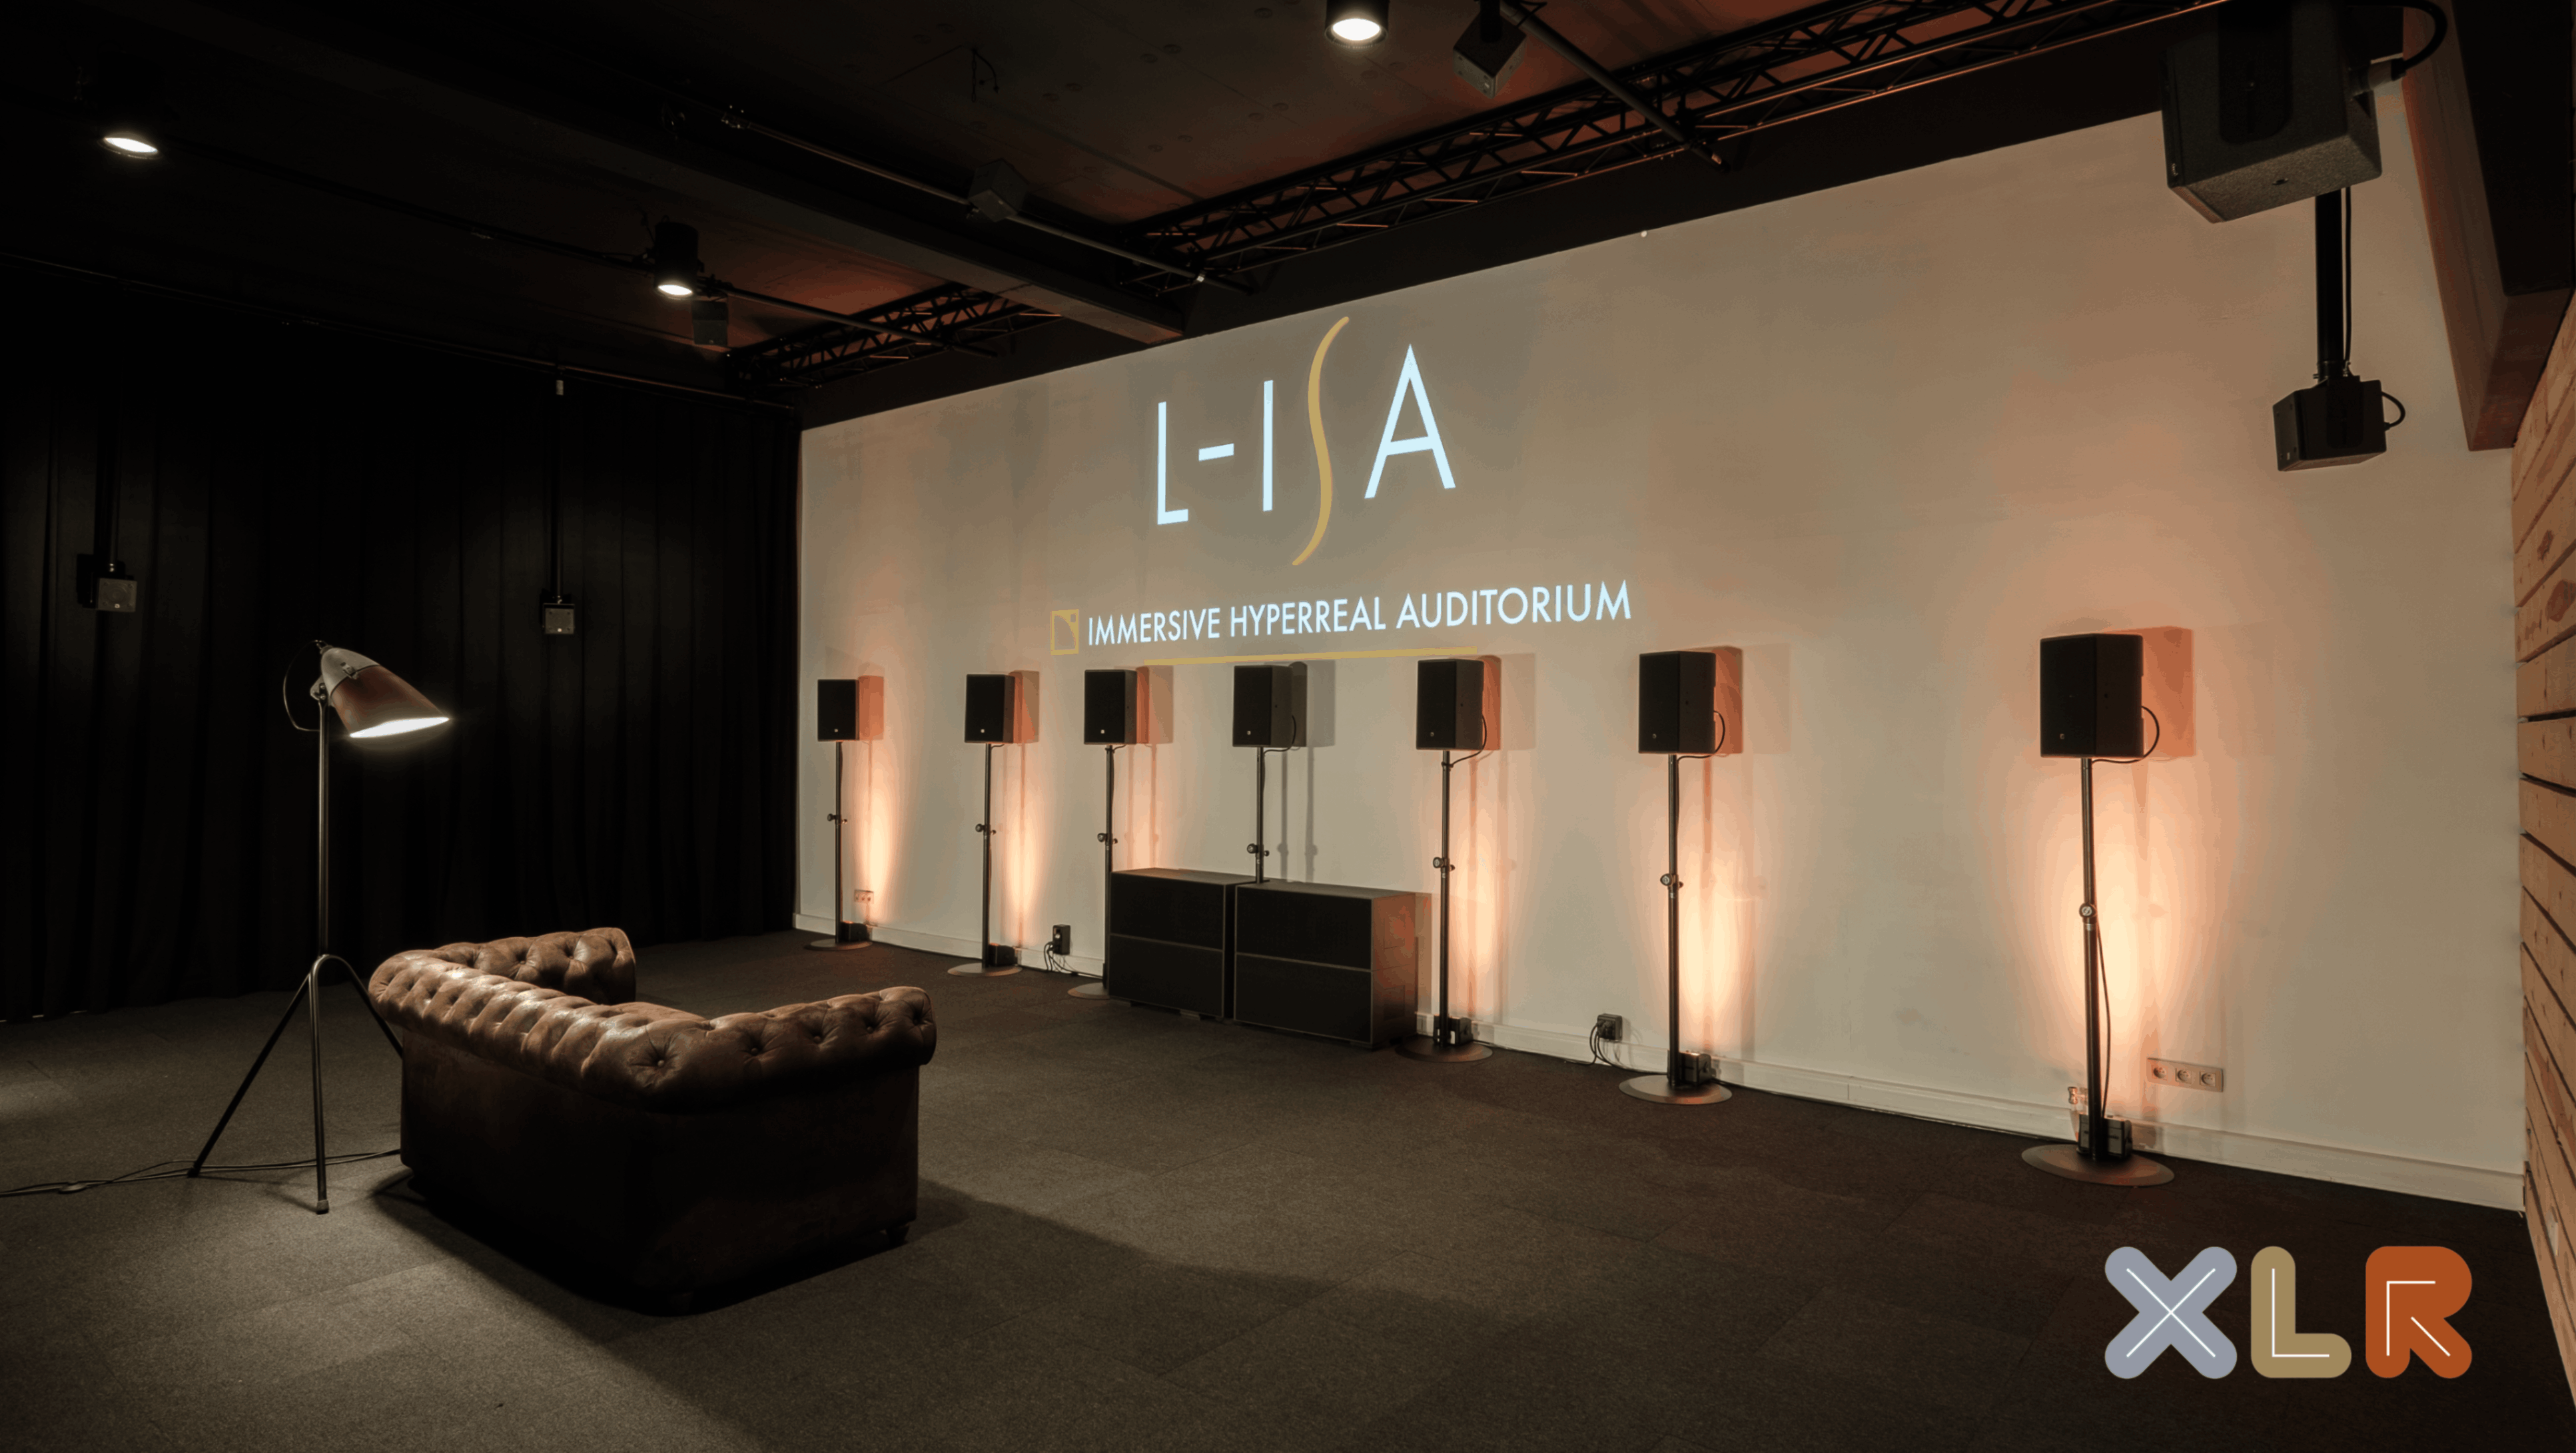 L-ISA Immersive Hyperreal Experience Now Exclusively On Demo At XLR 3